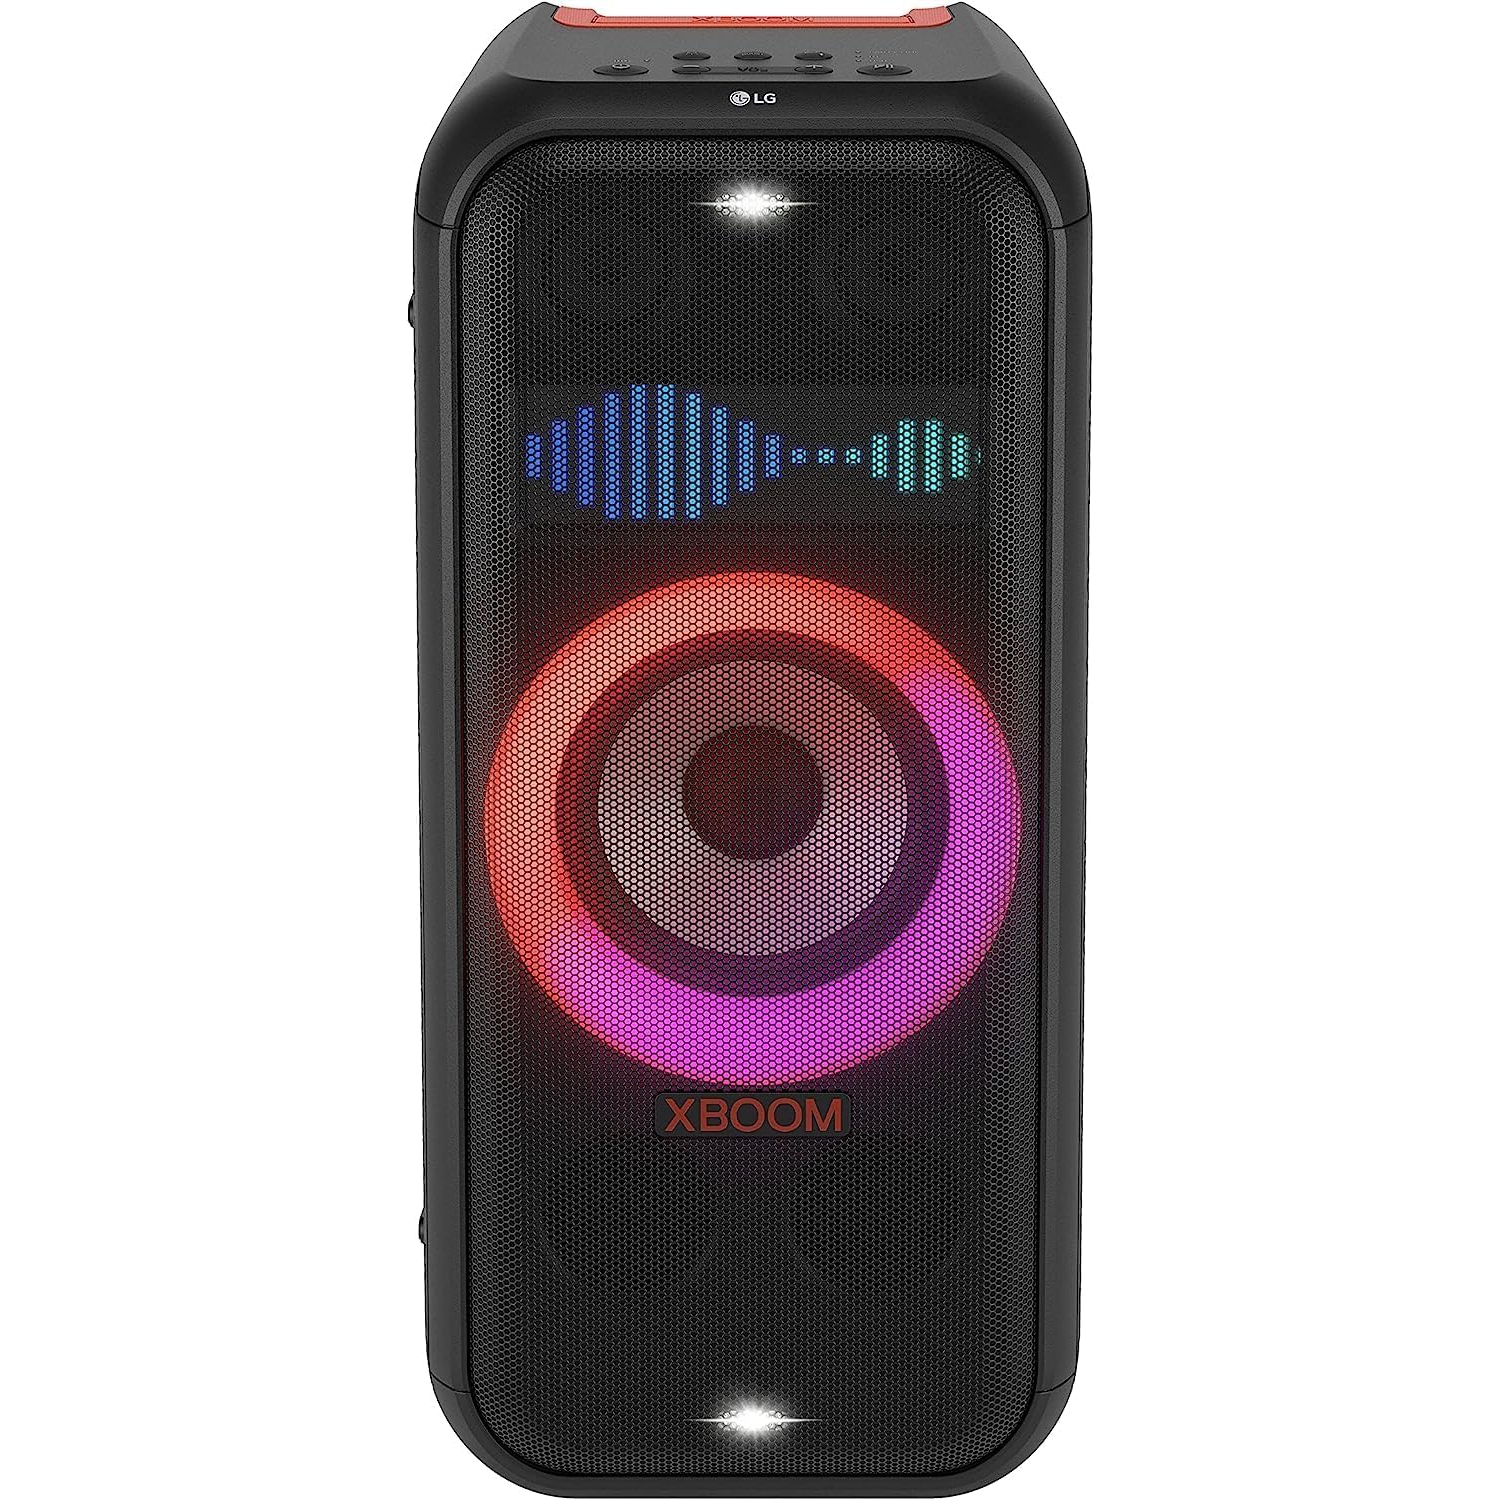 LG XBOOM XL7 Portable Tower Speaker with 250W of Power and Pixel LED Lighting with up to 20 Hrs of Battery Life,Black - Open Box - 10/10 Condition